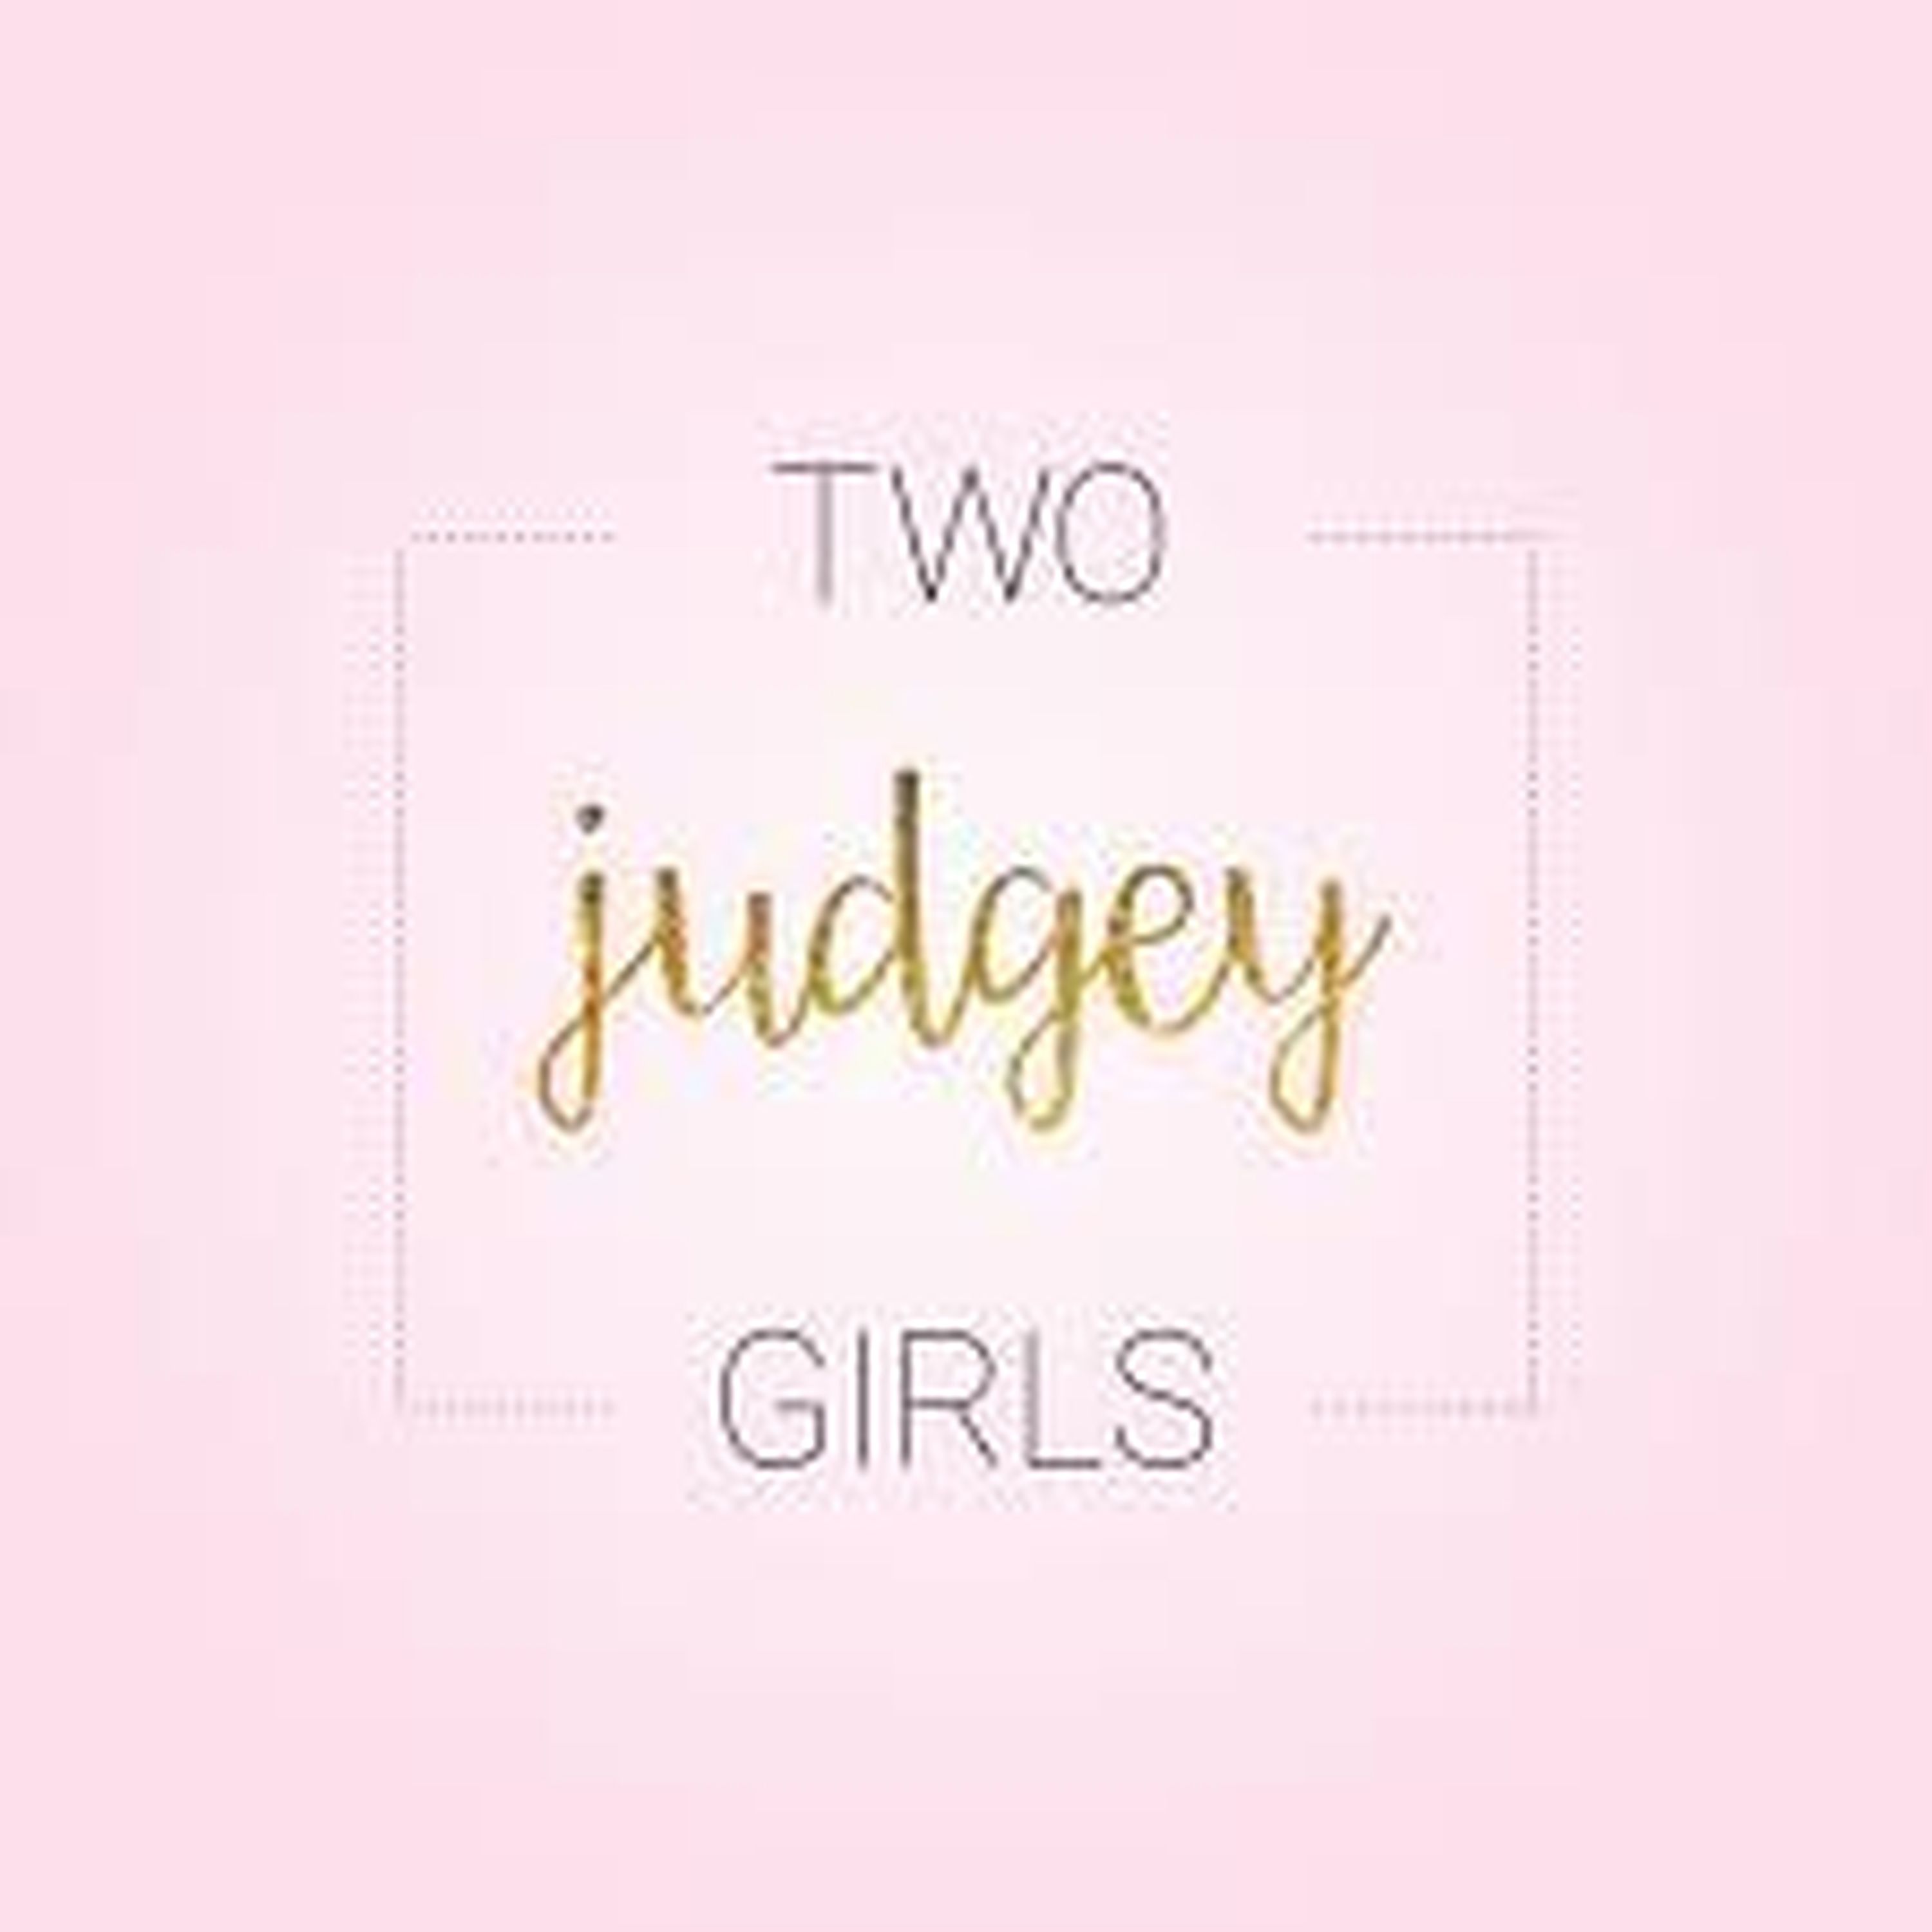 Ep122: Two Judgey Girls